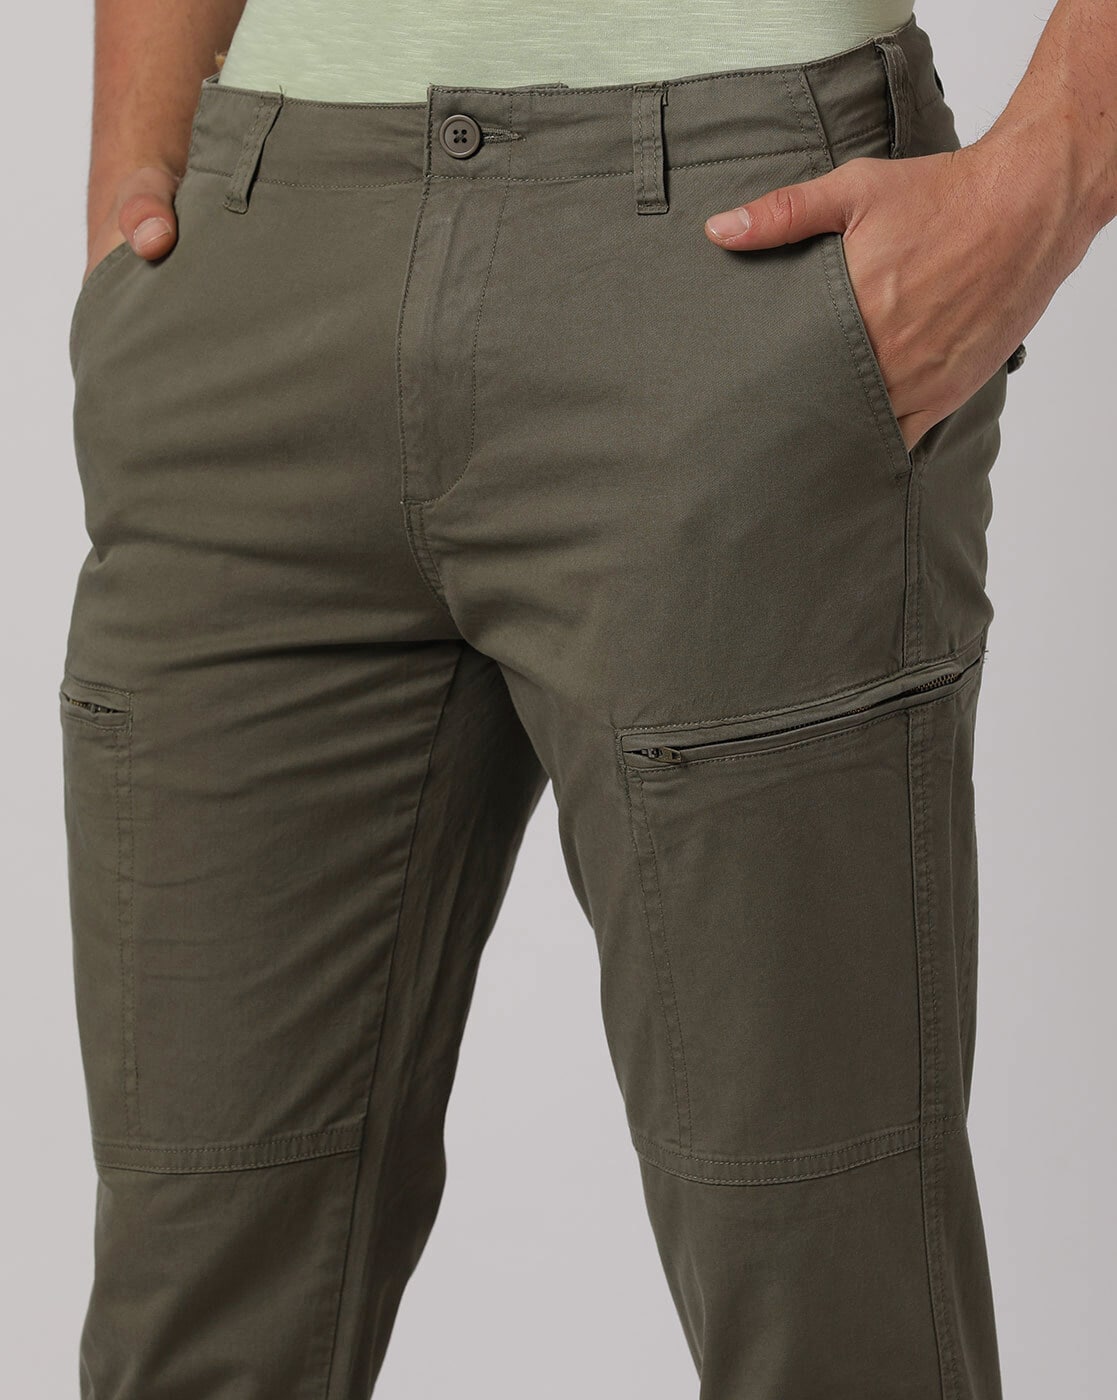 Buy Olive Trousers  Pants for Men by Buda Jeans Co Online  Ajiocom